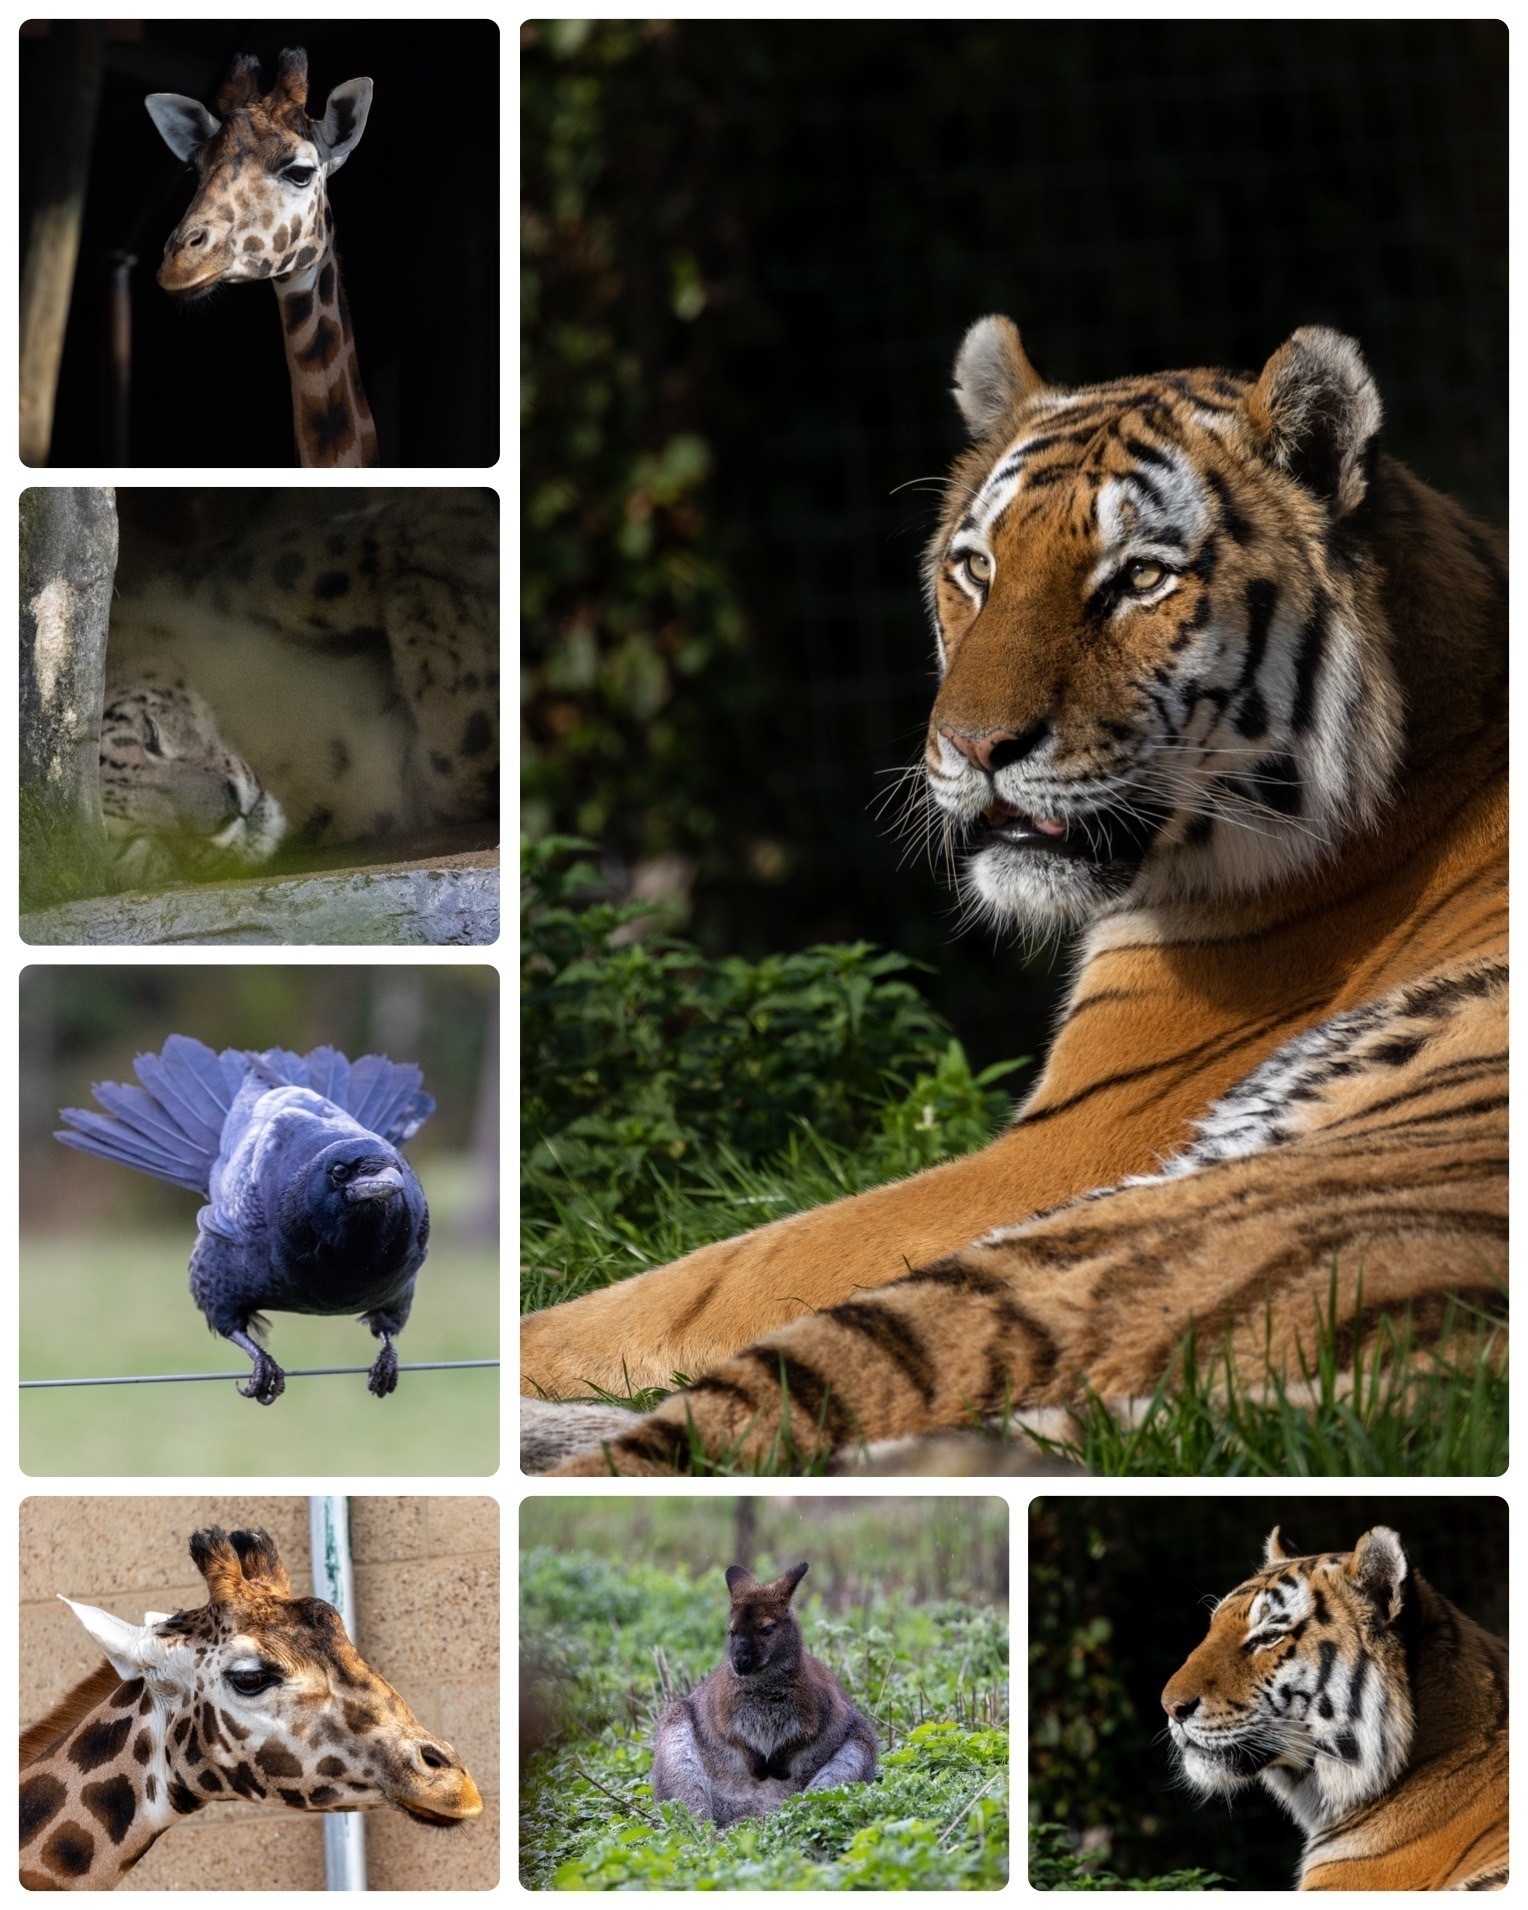 Collage of animals including tigers, giraffes, snow leopard, wallaby and a rook